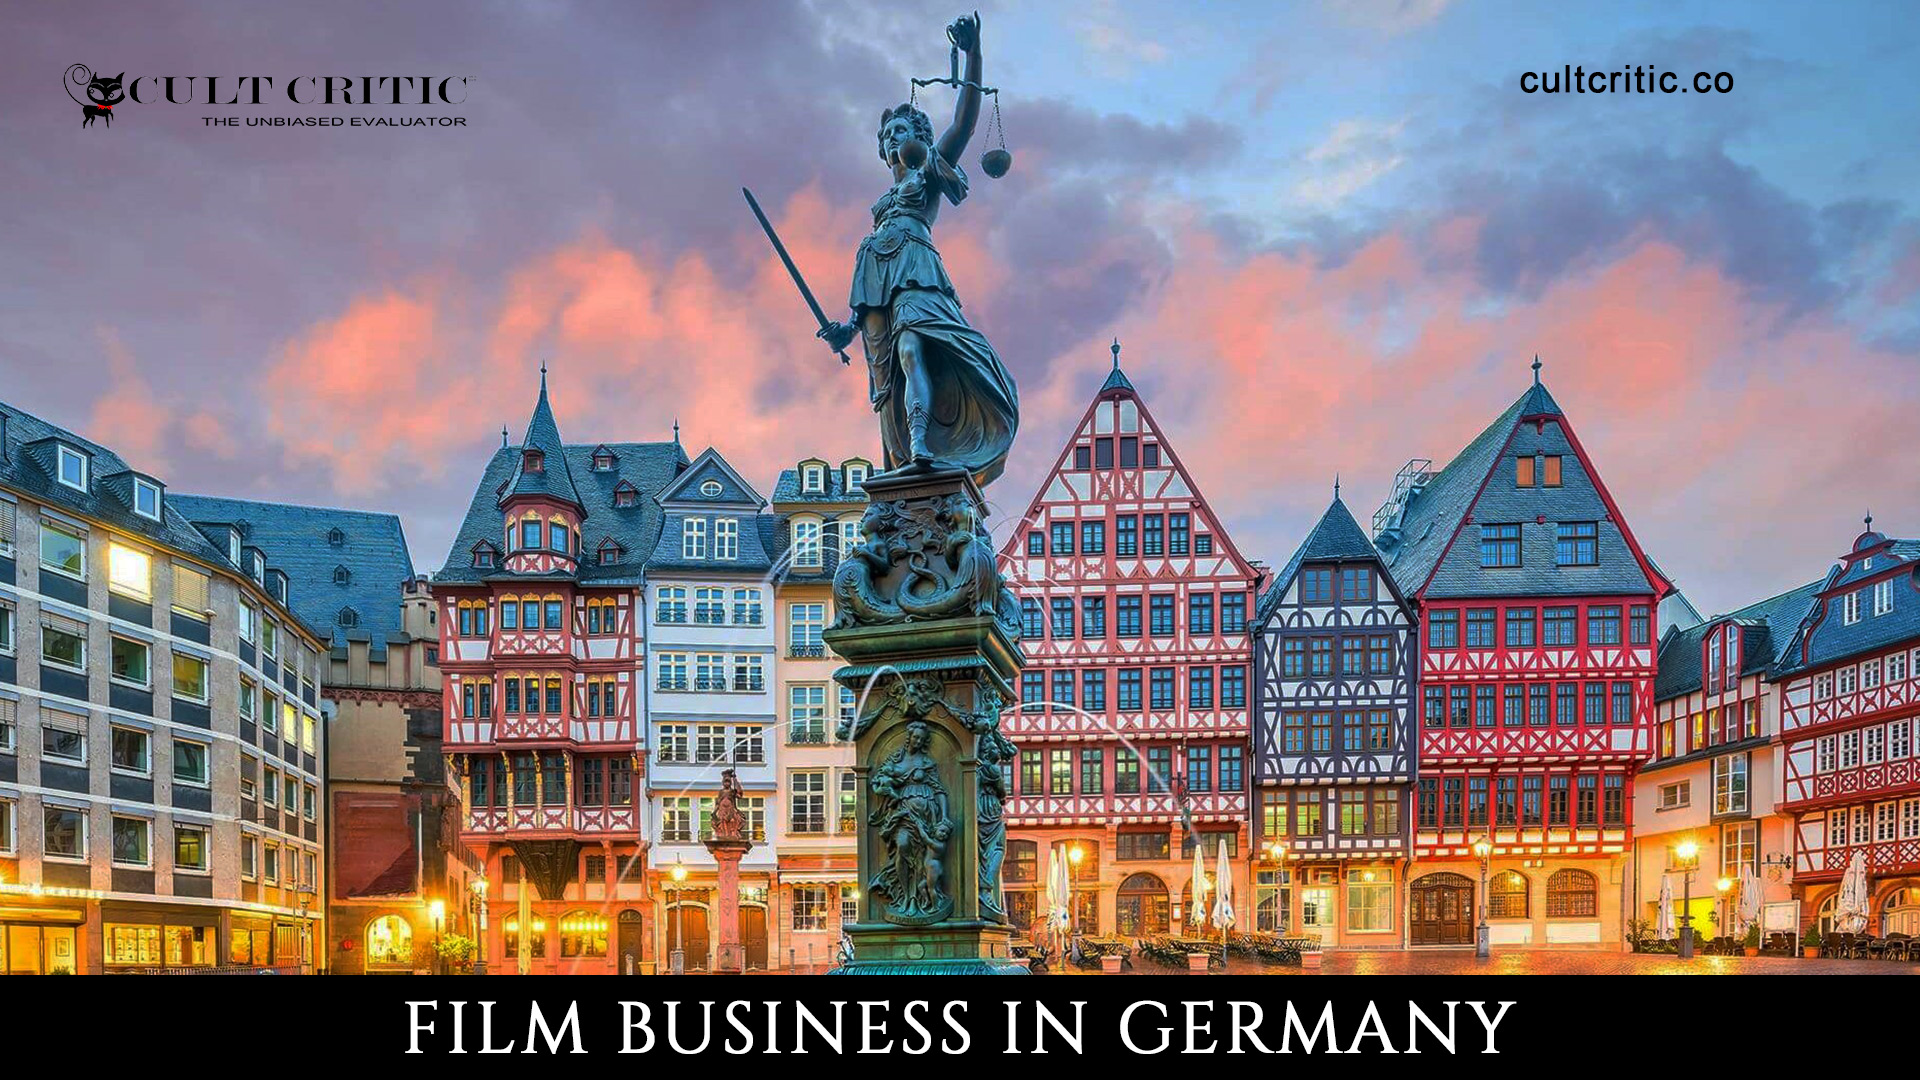 Cult Critic Film Business in Germany